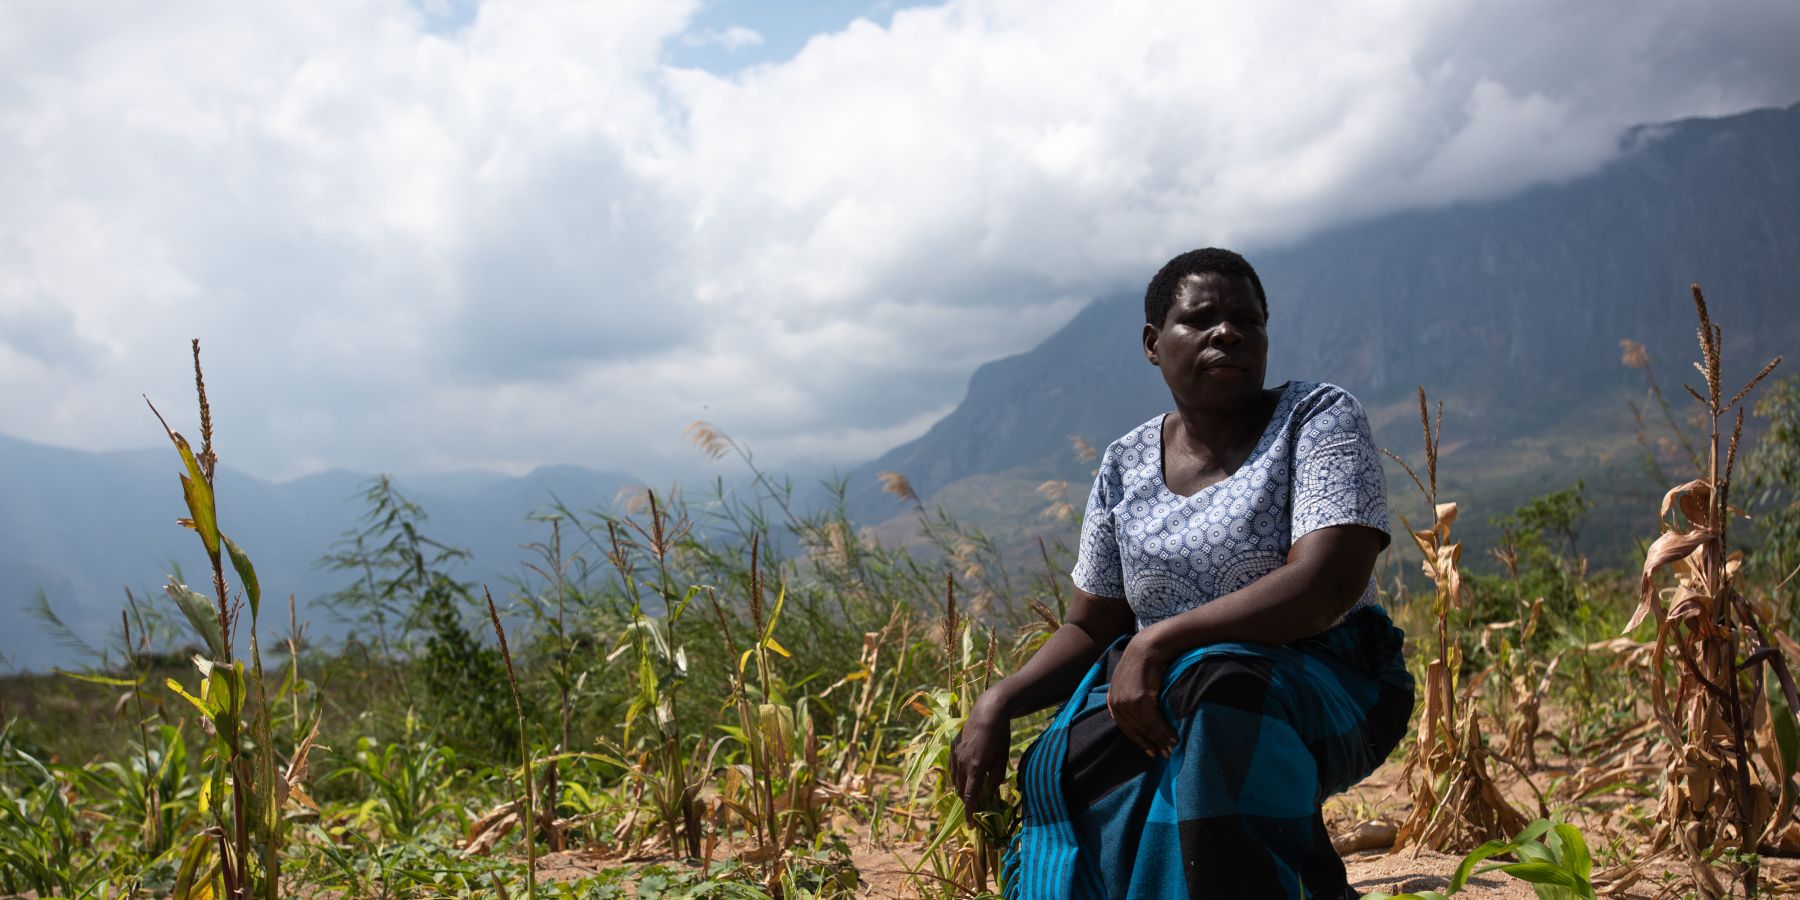 Enife, a farmer in Malawi stands in her devastated field